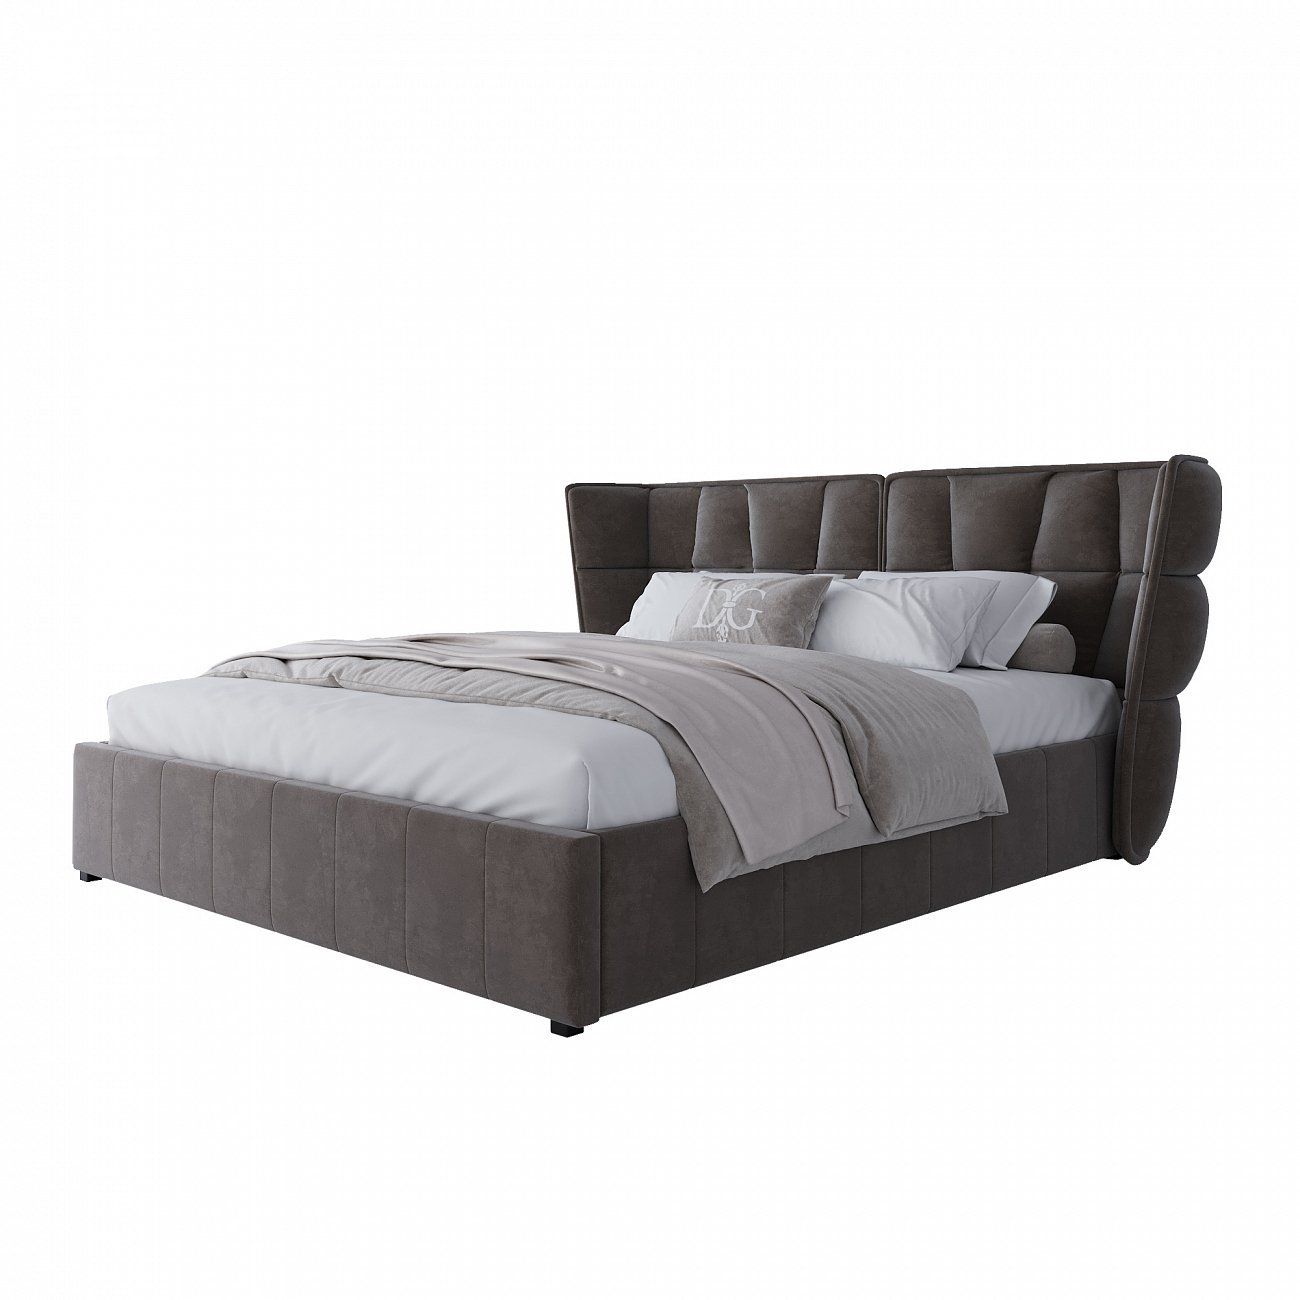 Double bed 180x200 cm grey Husk (king size)